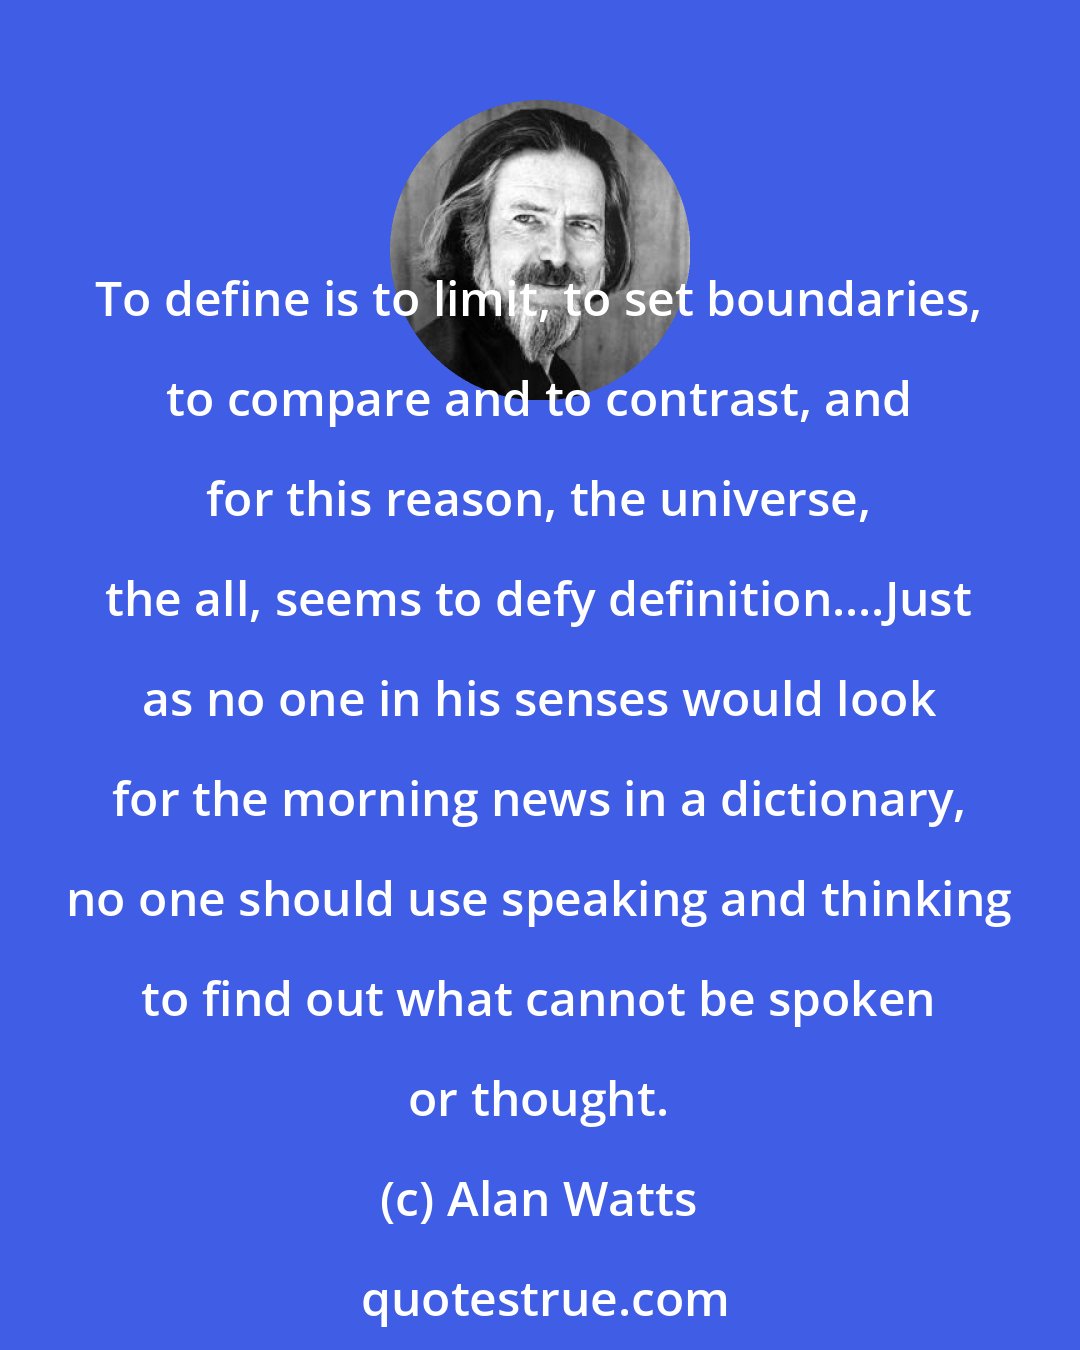 Alan Watts: To define is to limit, to set boundaries, to compare and to contrast, and for this reason, the universe, the all, seems to defy definition....Just as no one in his senses would look for the morning news in a dictionary, no one should use speaking and thinking to find out what cannot be spoken or thought.